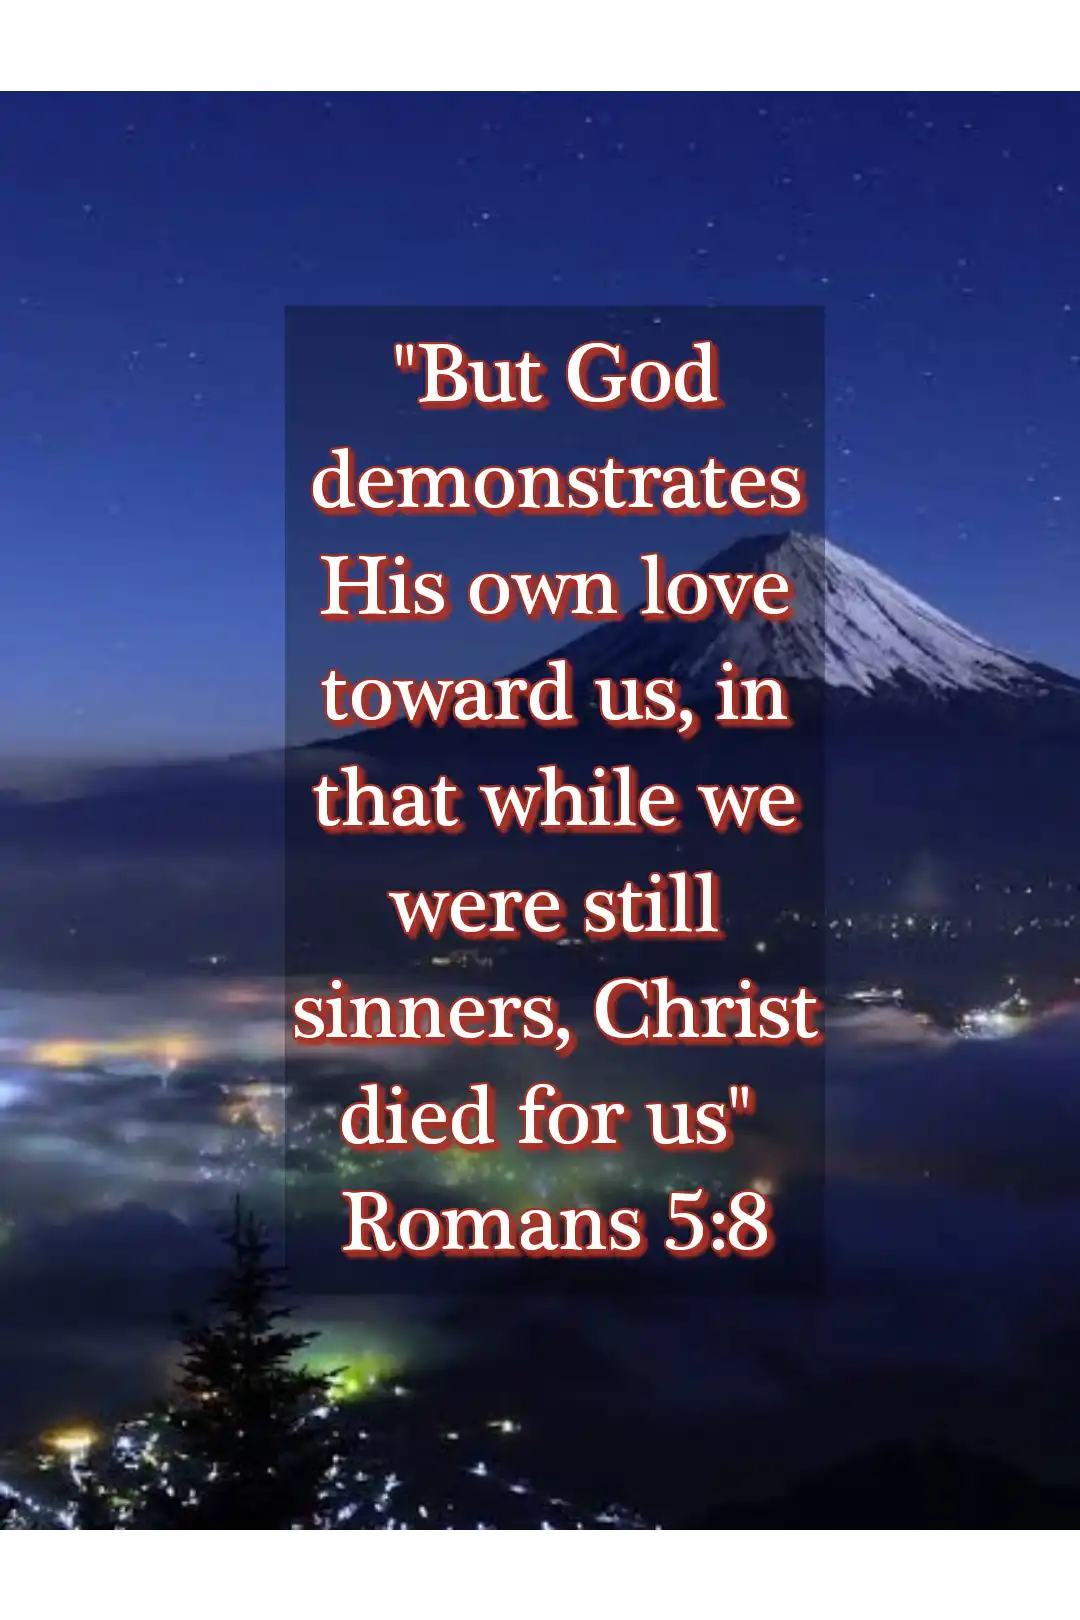 Bible verses about god’s love for us (Romans 5:8)